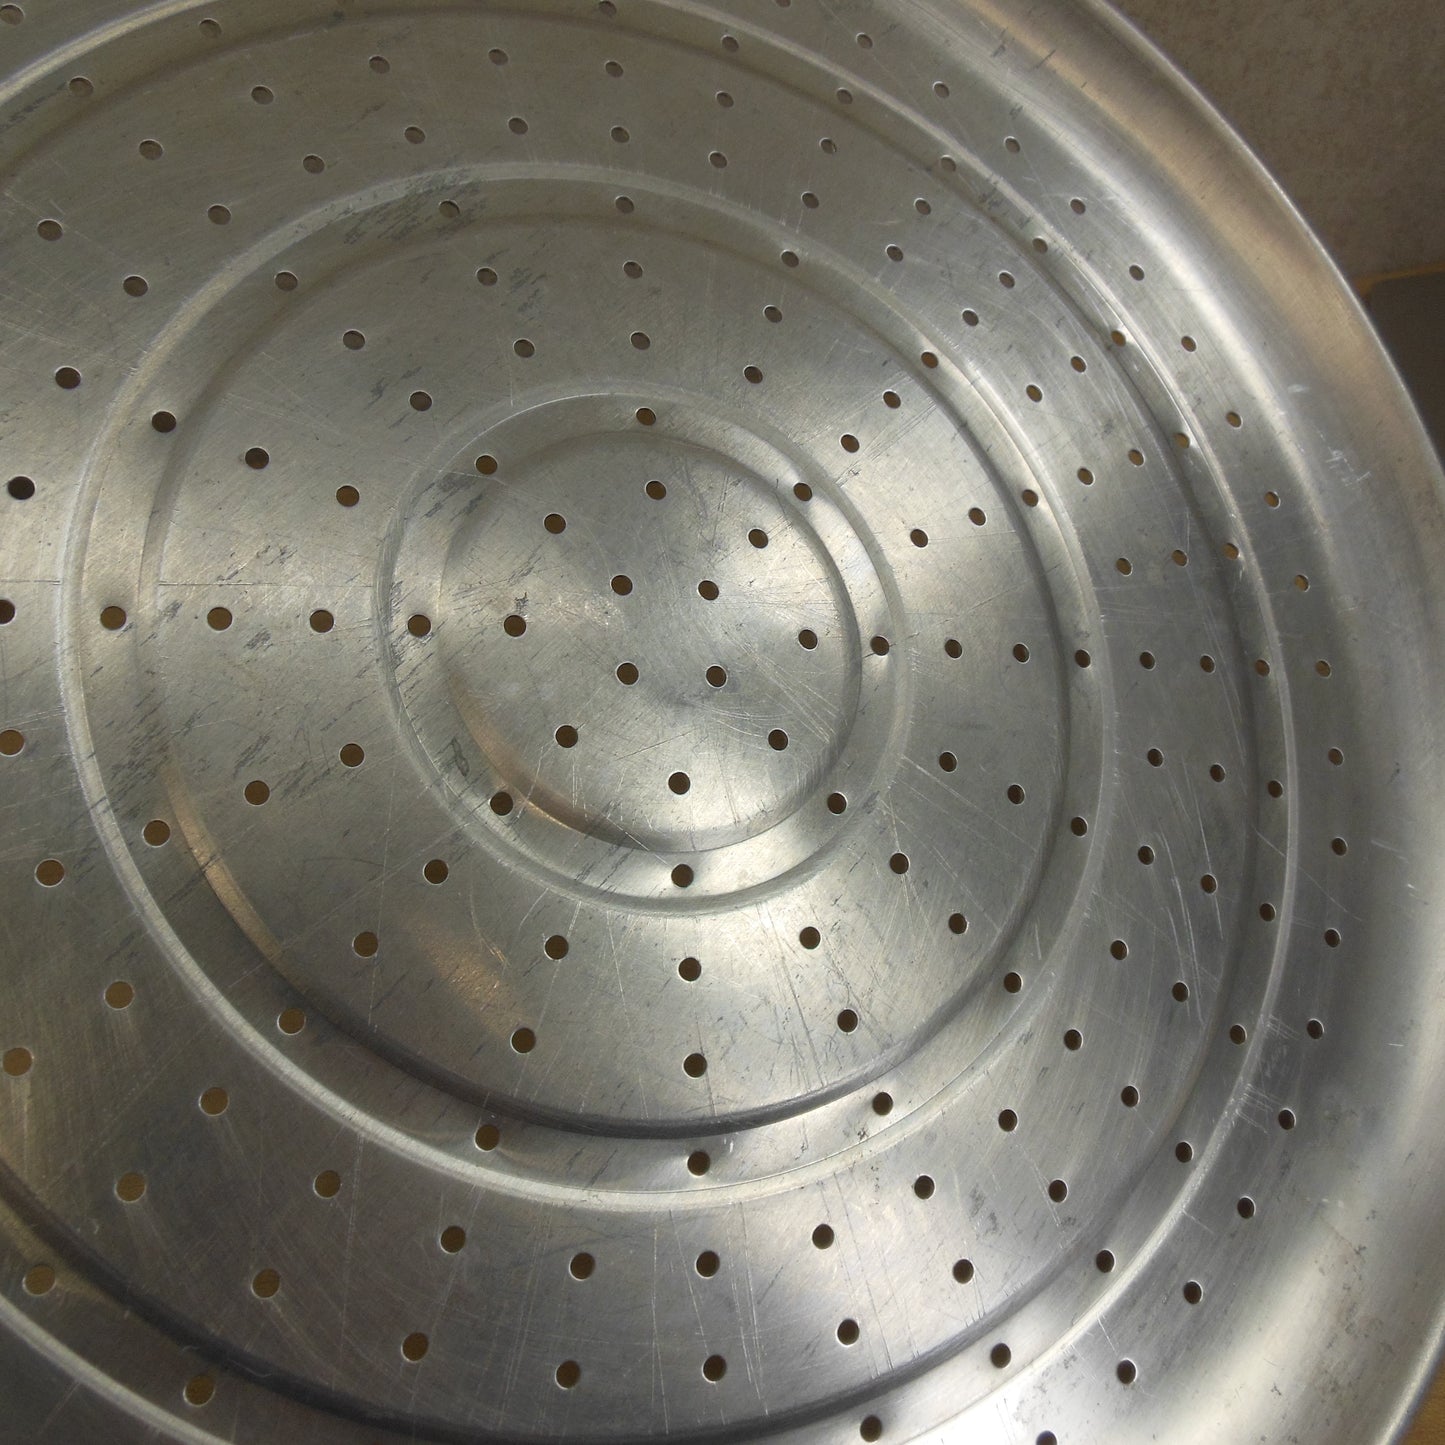 Ekco Perforated Aluminum Pizza Pan 13" & Bialetti Stainless Cutter Vintage